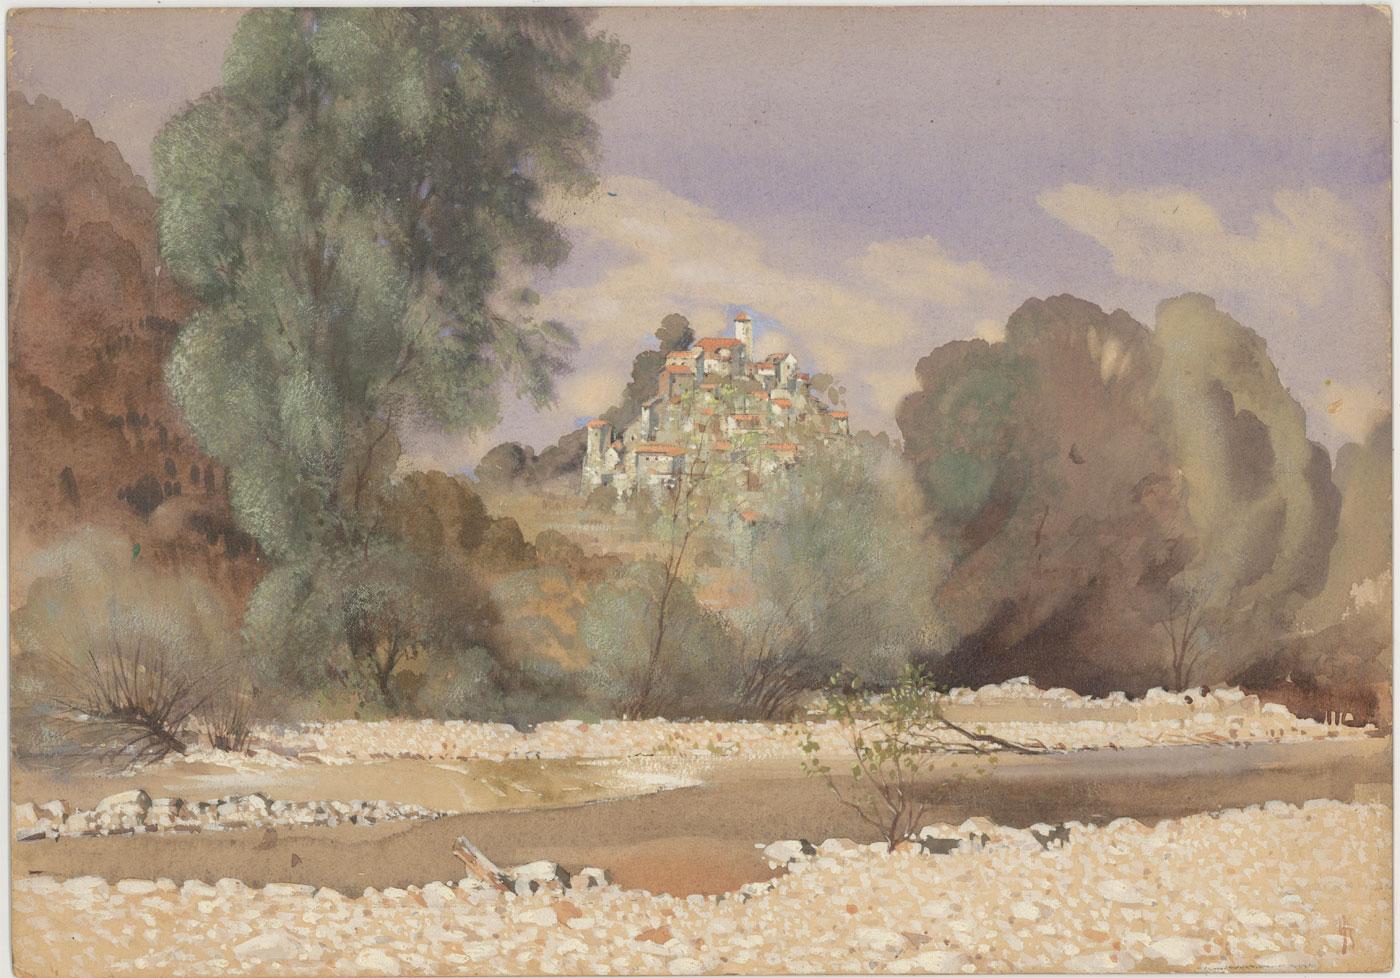 A wonderful mid 20th century landscape by the listed artist Laurence H.F. Irving. Here the artist has captured an idyllic Italian scene with a river and small town beyond. With watercolour wash and areas of thick gouache. Signed with monogram. On